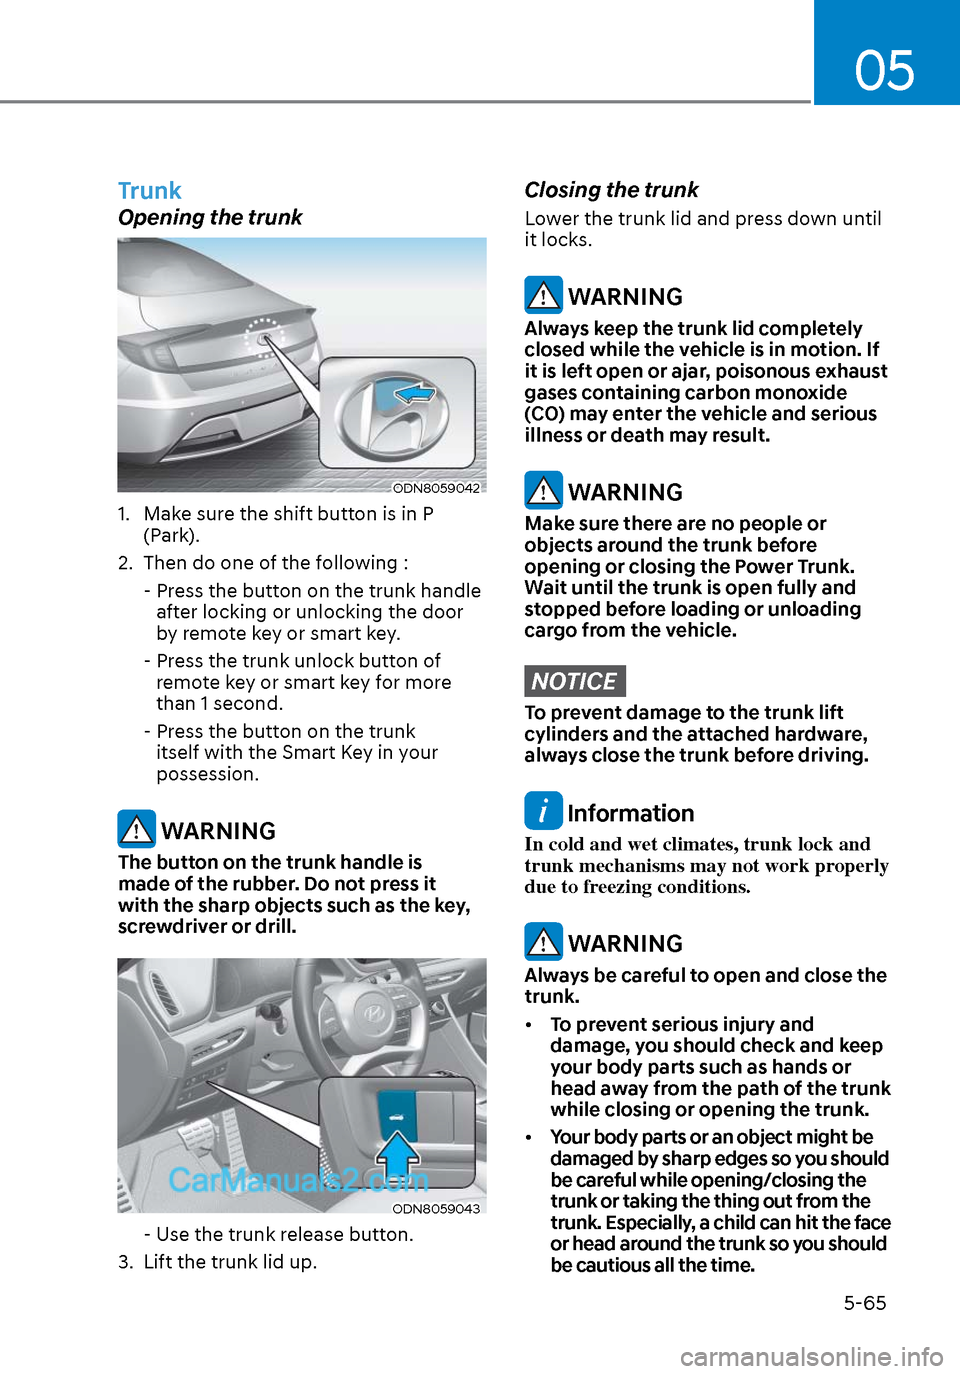 Hyundai Sonata 2020 User Guide 05
5-65
Trunk
Opening the trunk
ODN8059042ODN8059042
1.  Make sure the shift button is in P (Park).
2.  Then do one of the following :
  -  Press the button on the trunk handle  after locking or unloc